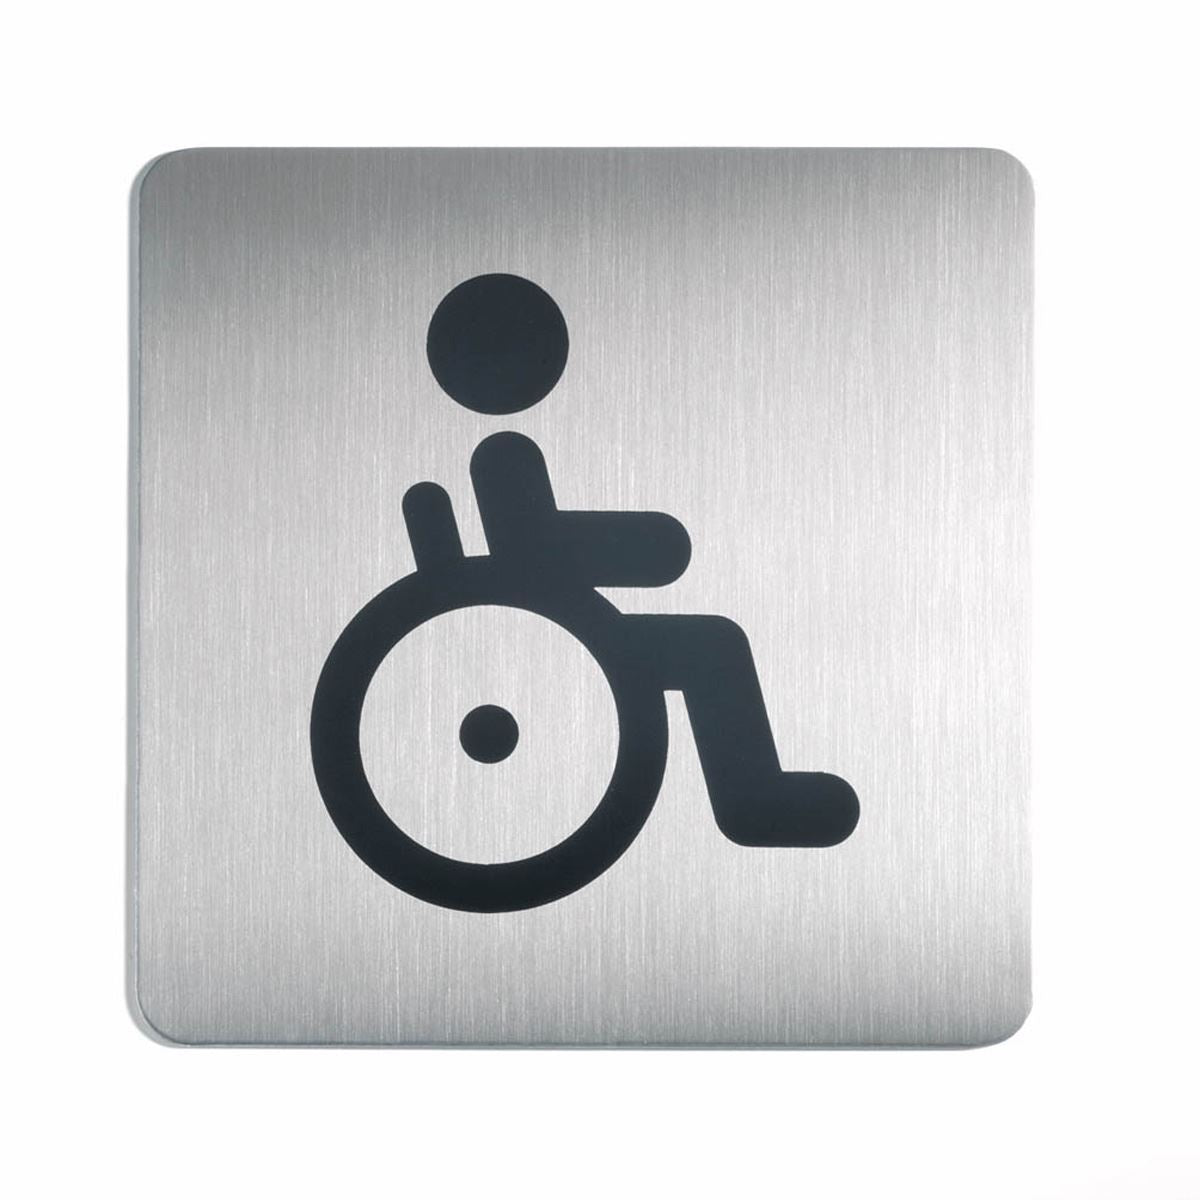 Durable Adhesive Disabled Bathroom Symbol Toilet Sign | Stainless Steel | Square